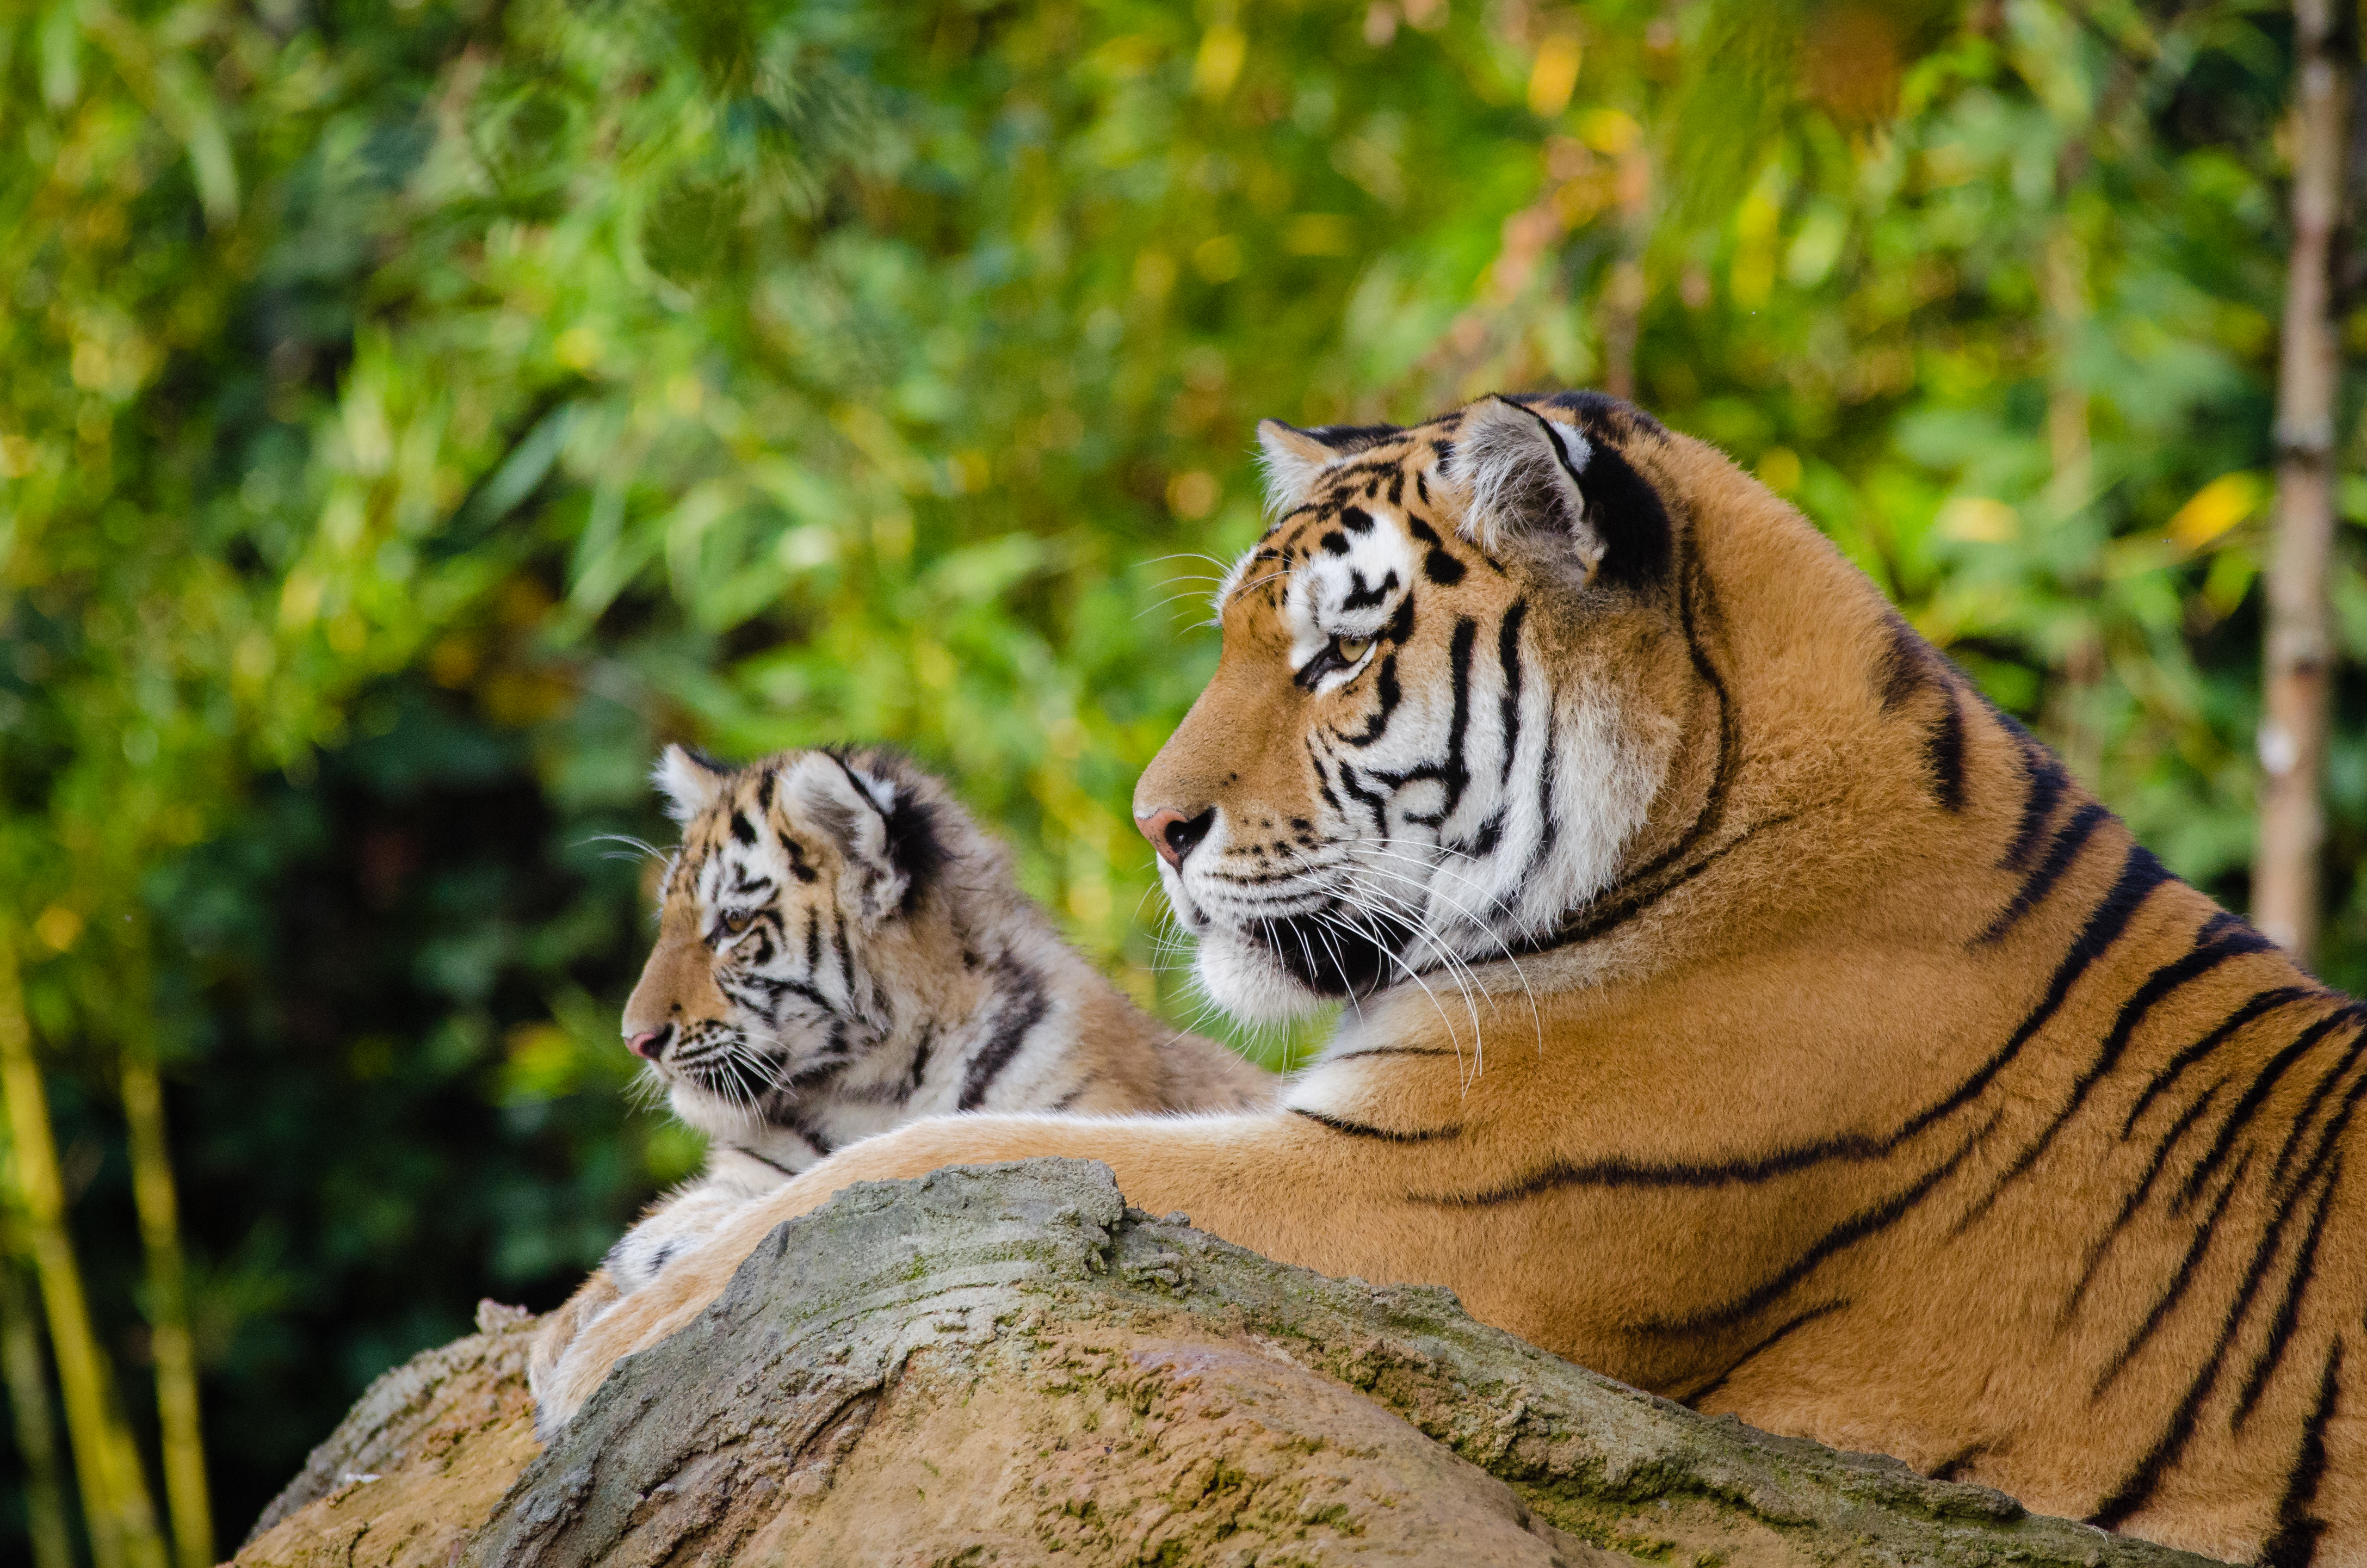 File:Siberian Tiger Mom with Cub (30547501491).jpg - Wikimedia Commons